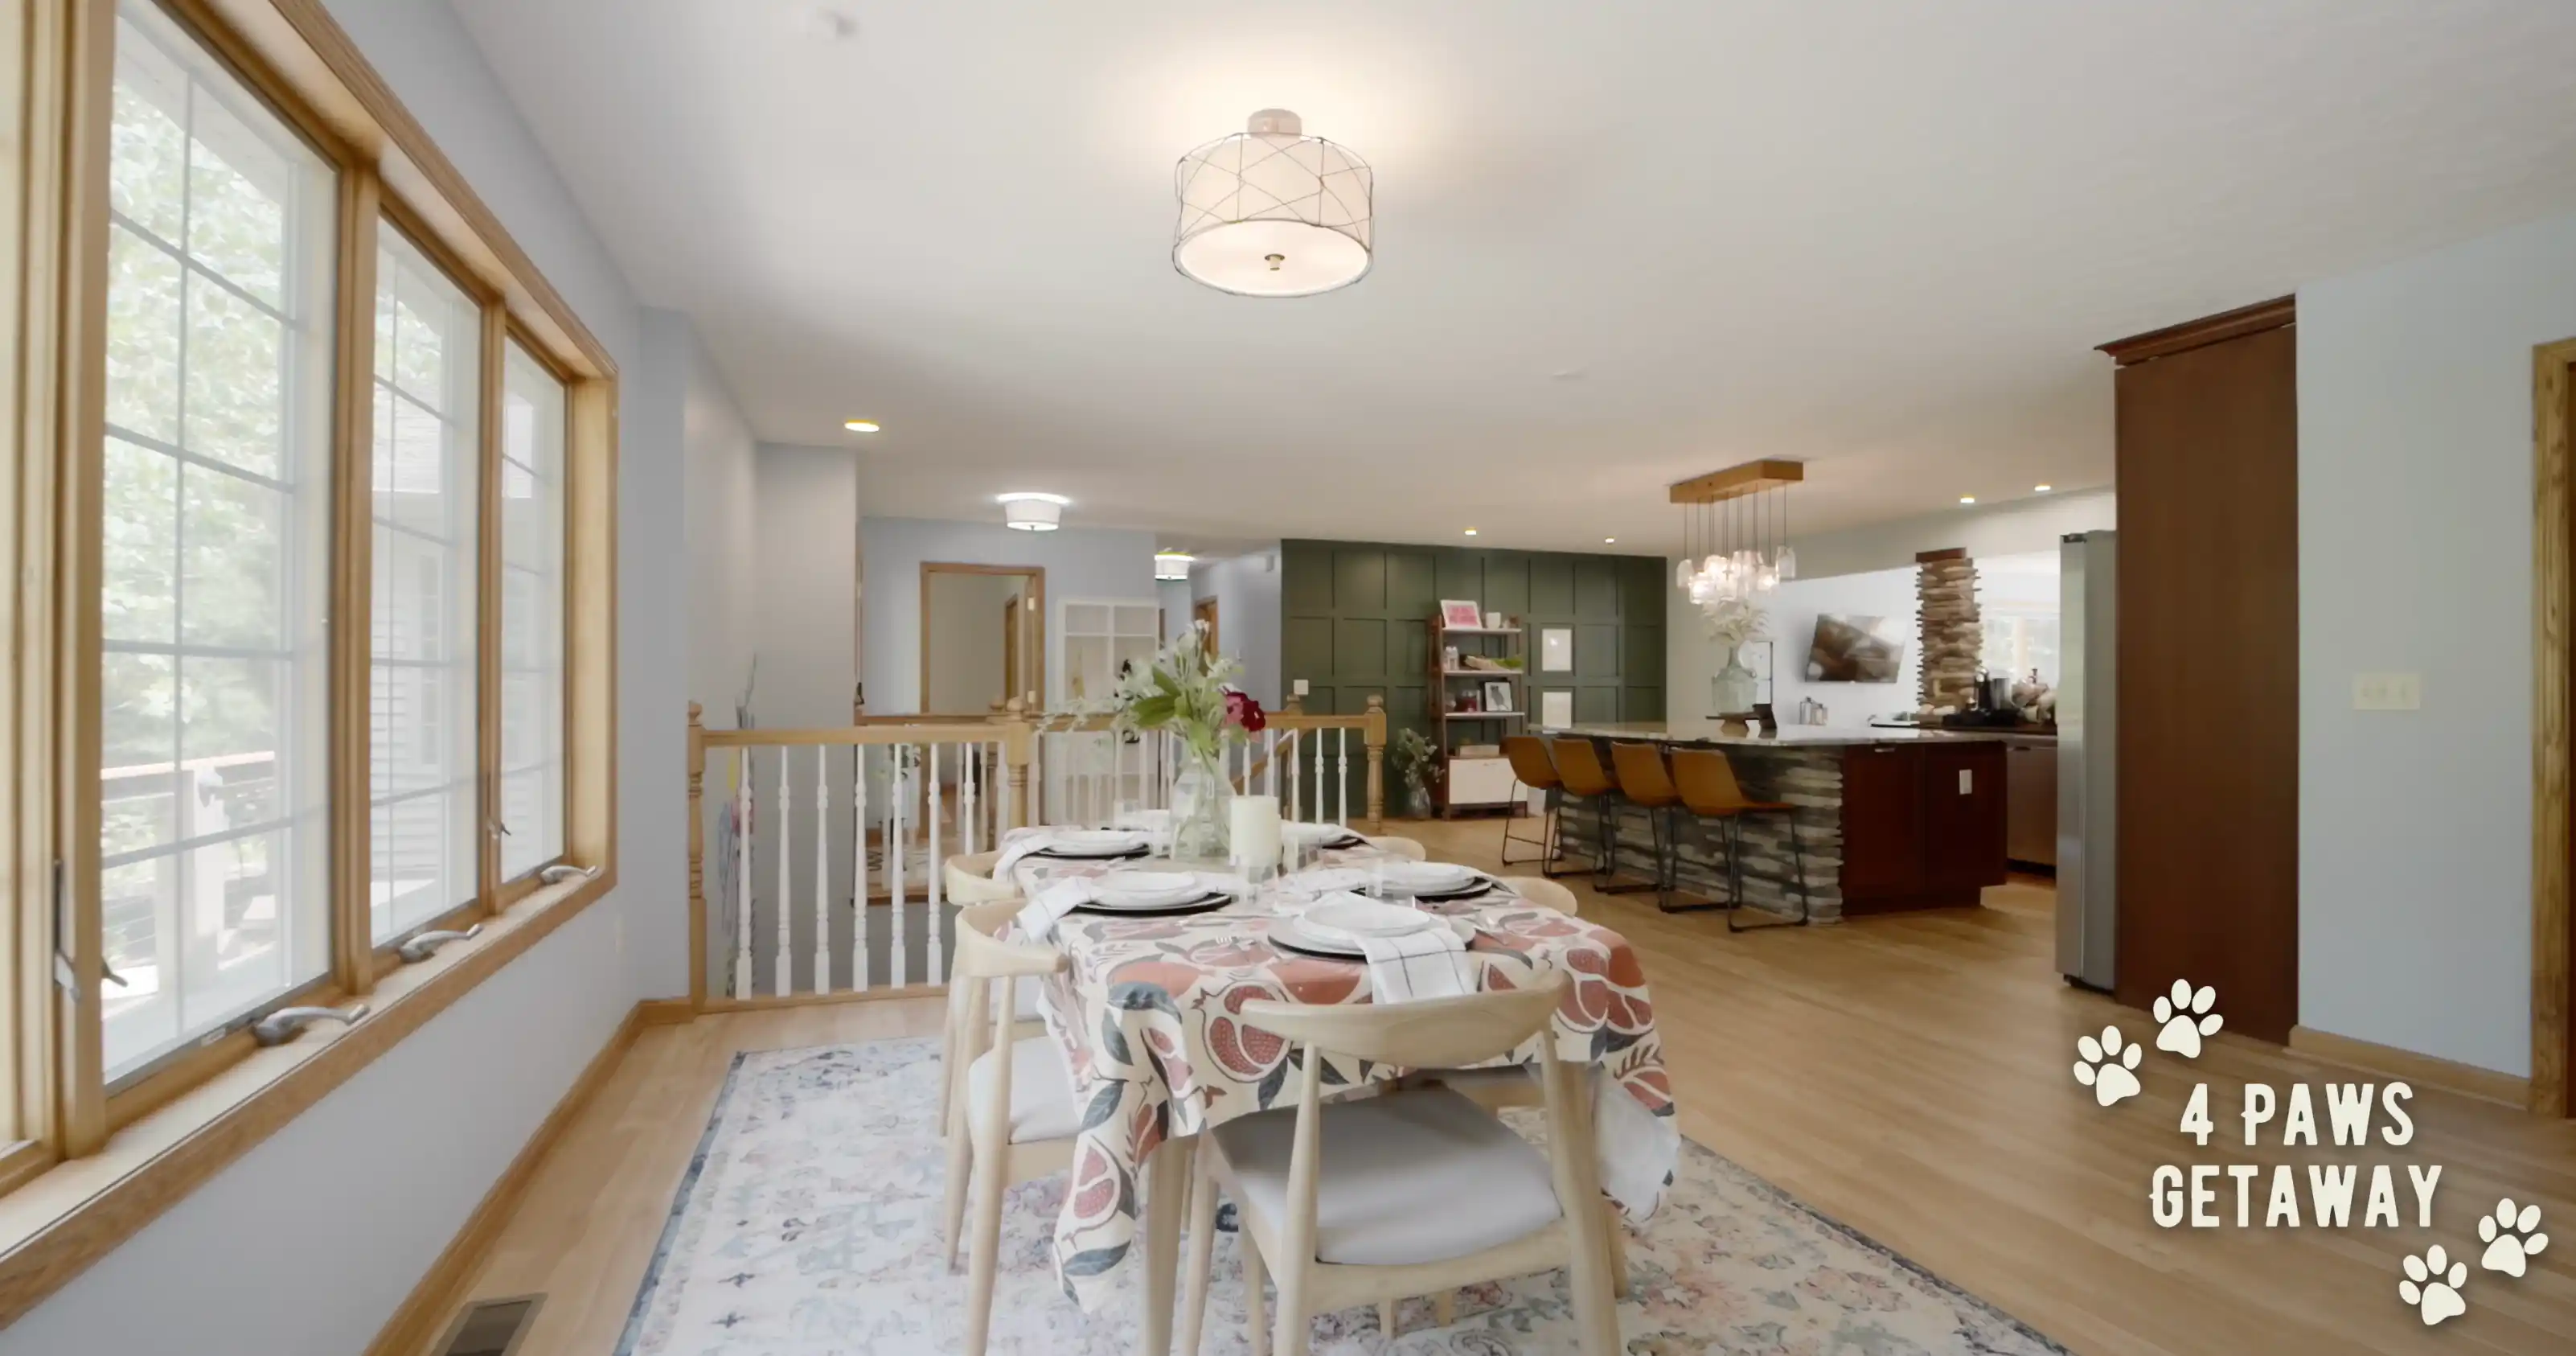 Bright and welcoming dining area leading to a kitchen inside the "4 Paws Getaway" home, showing a dining table set near windows with natural light, and a glimpse of the kitchen in the background.